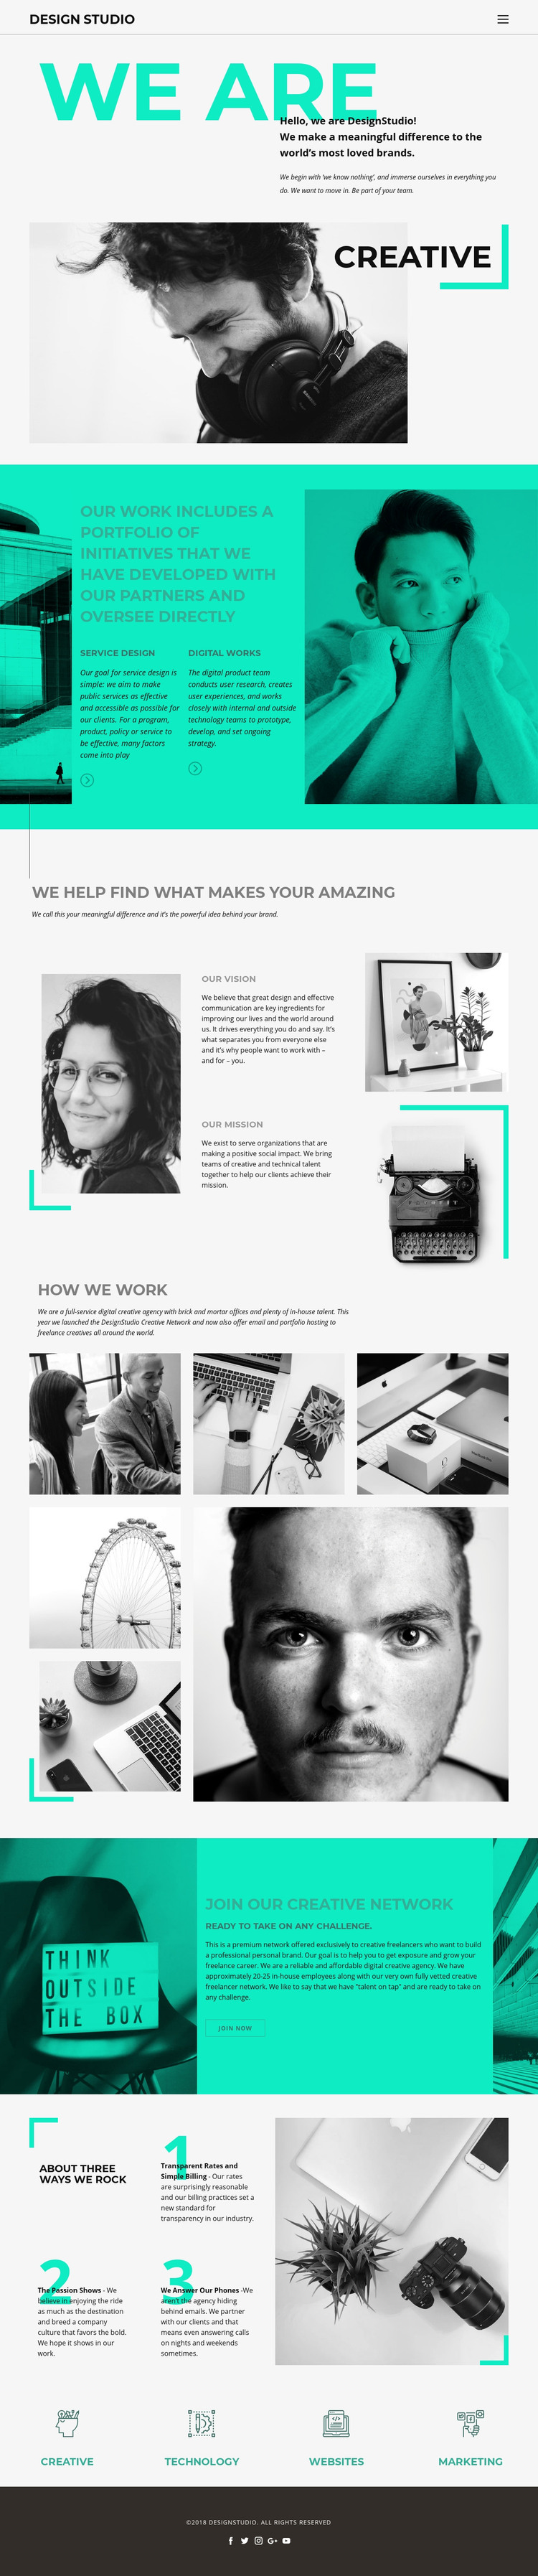 We are creative business Homepage Design